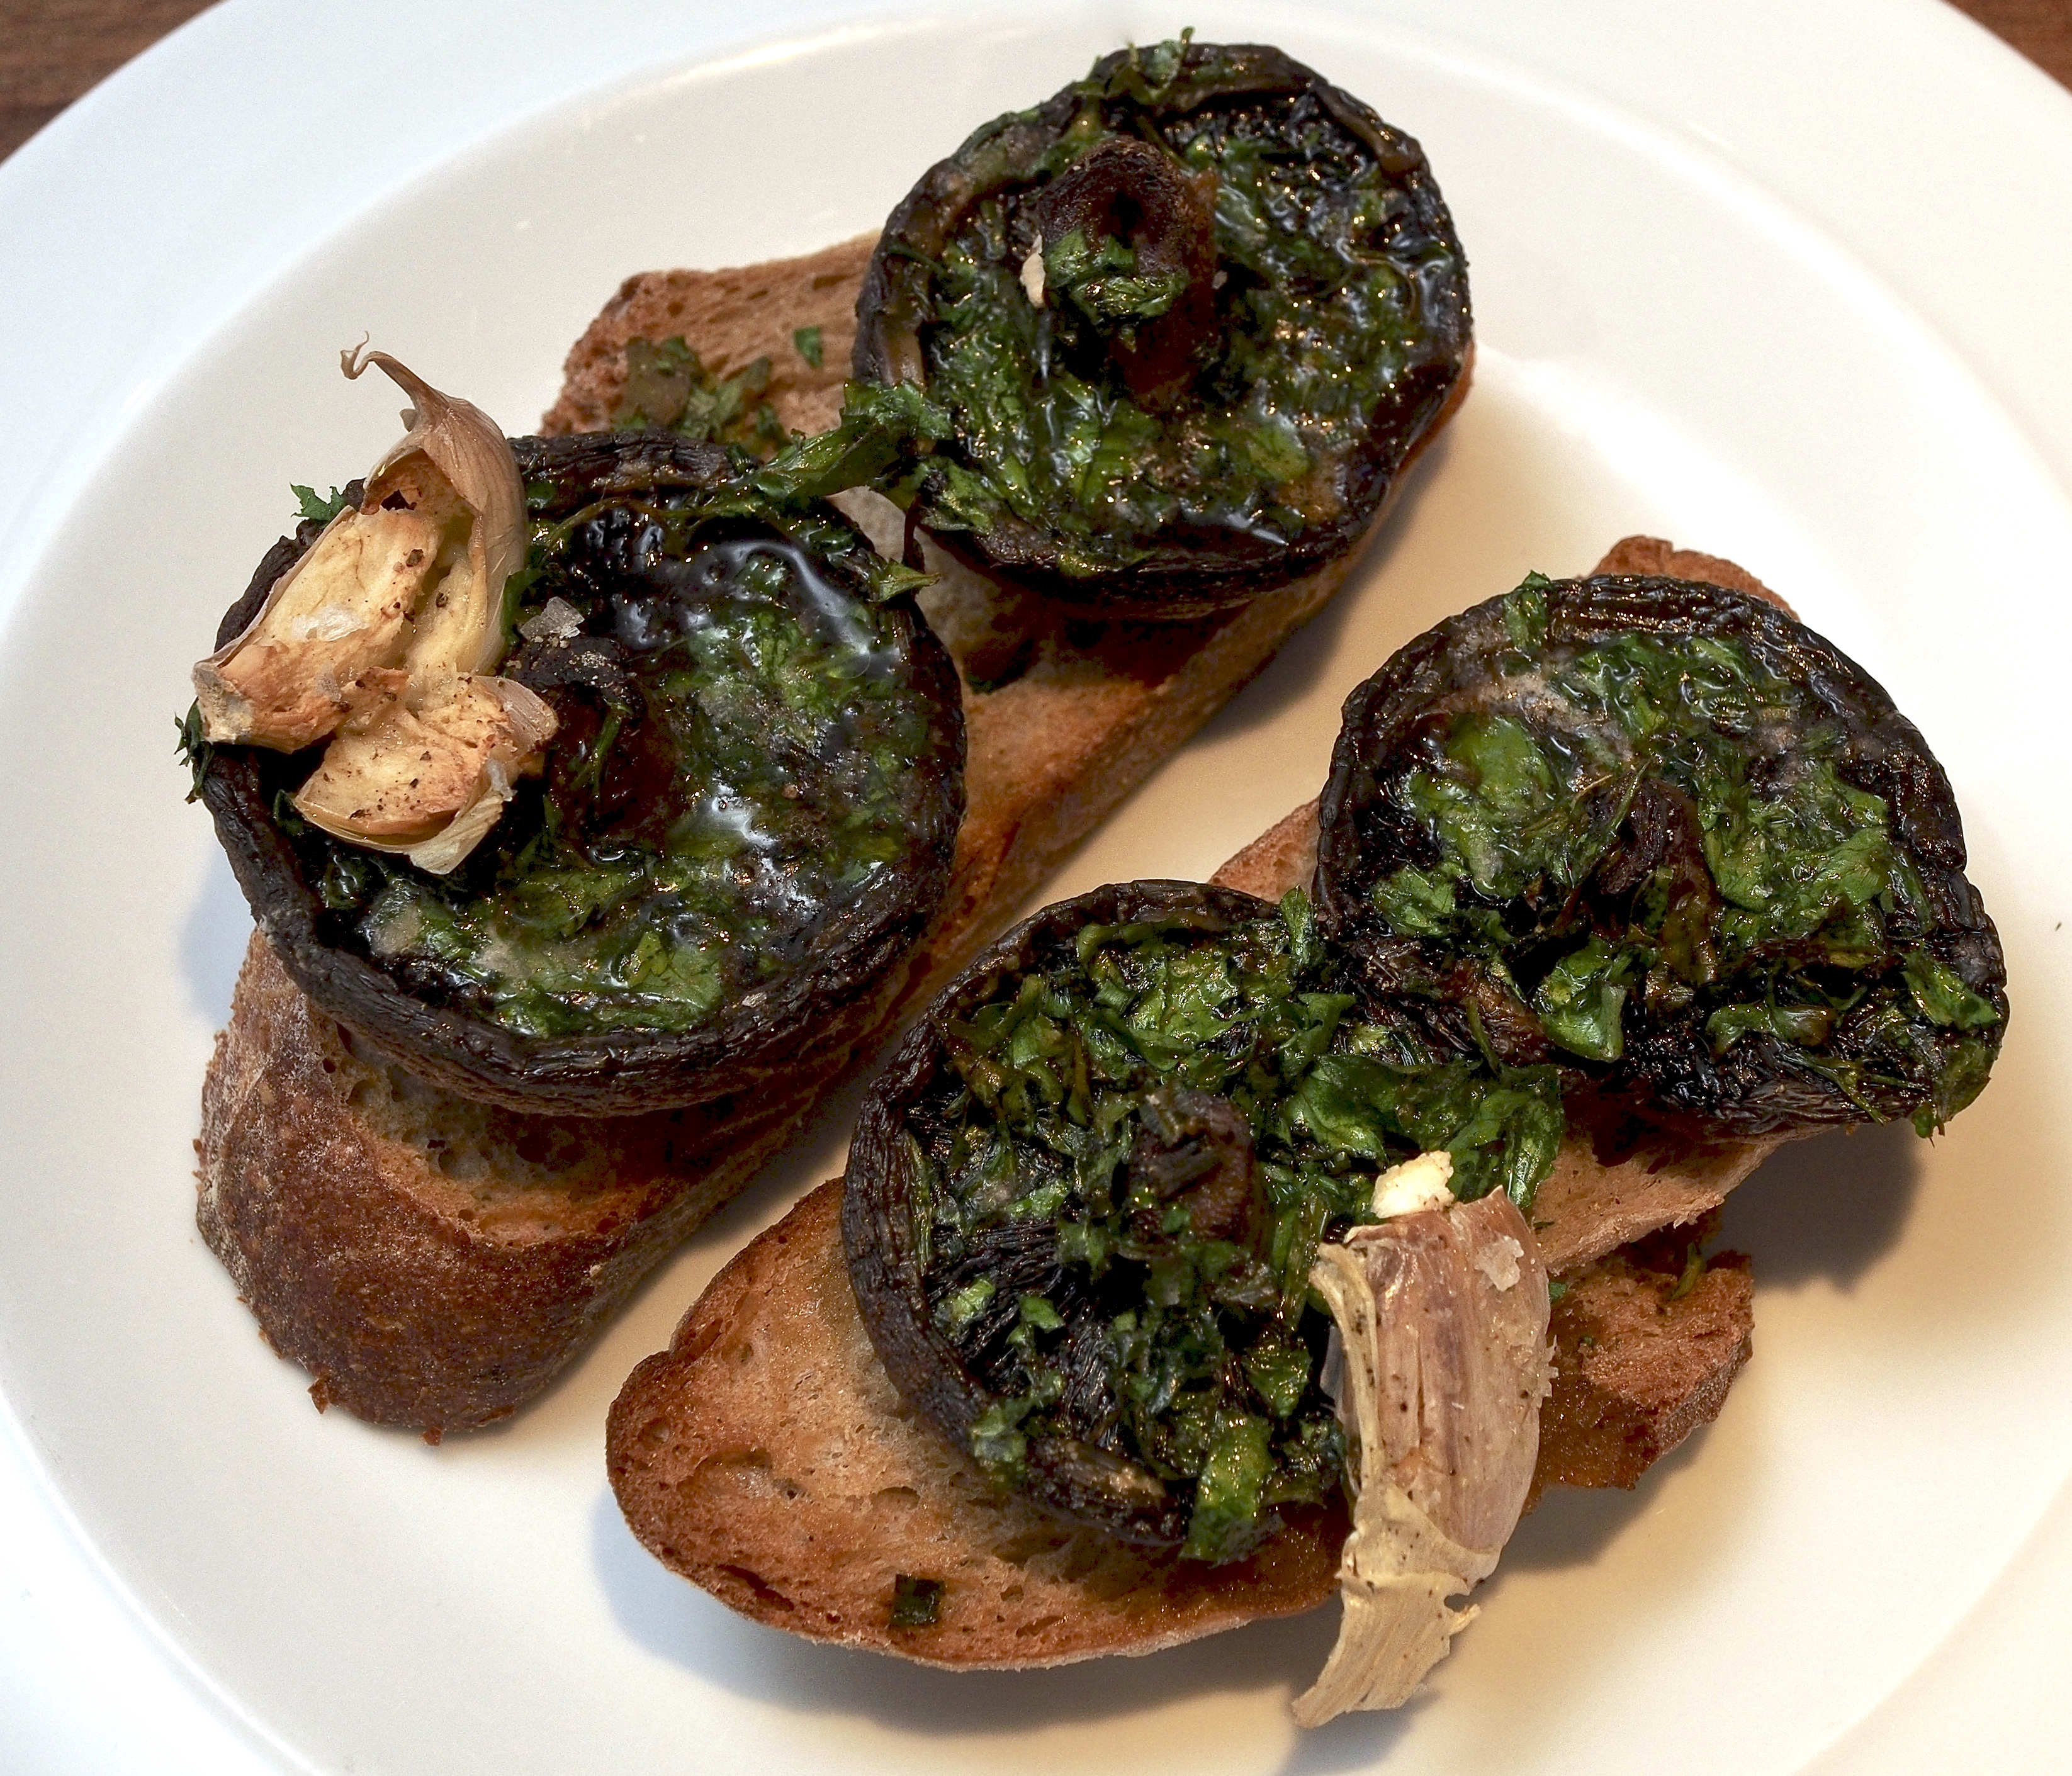 Mushrooms baked on toast with herbs, butter &amp; garlic